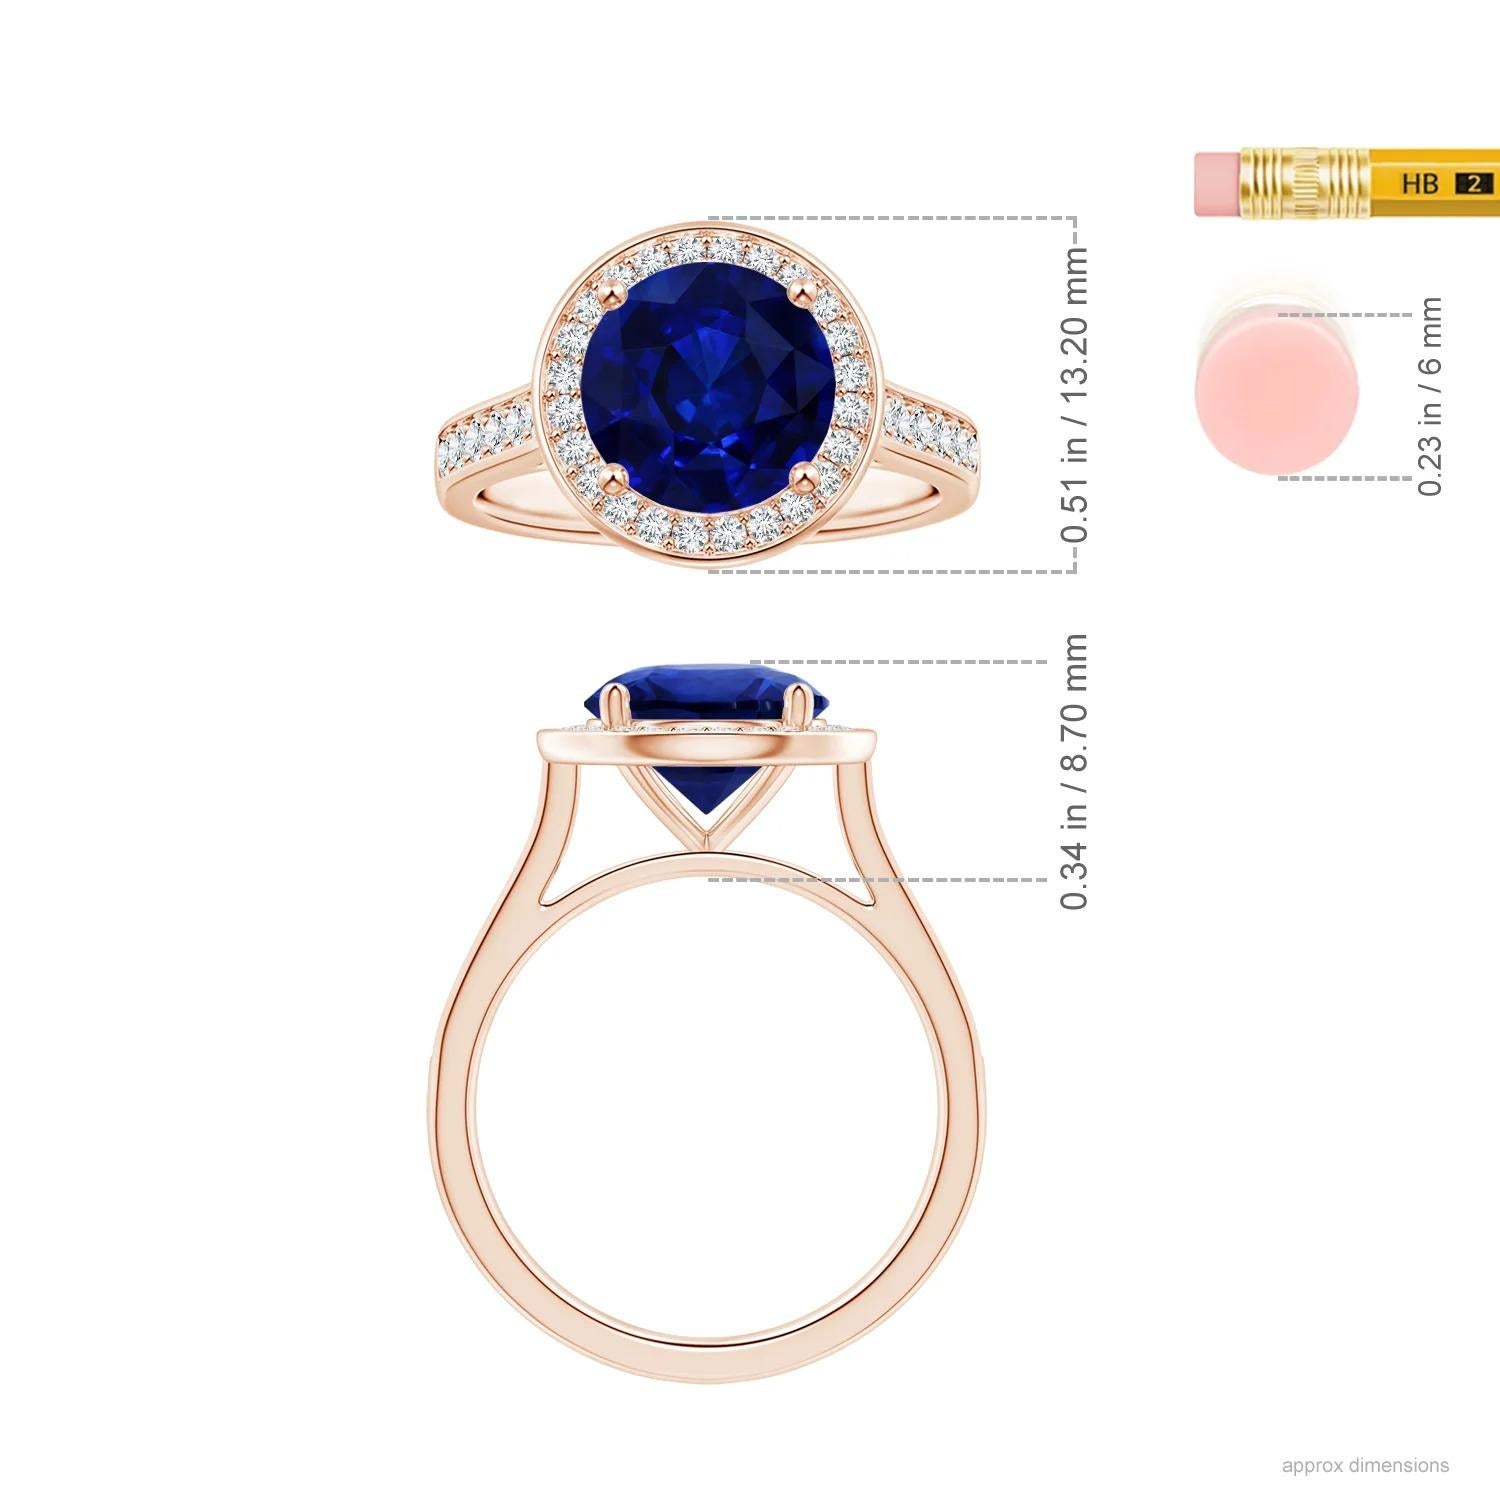 For Sale:  Angara Gia Certified Blue Sapphire Halo Ring in Rose Gold with Diamonds 5